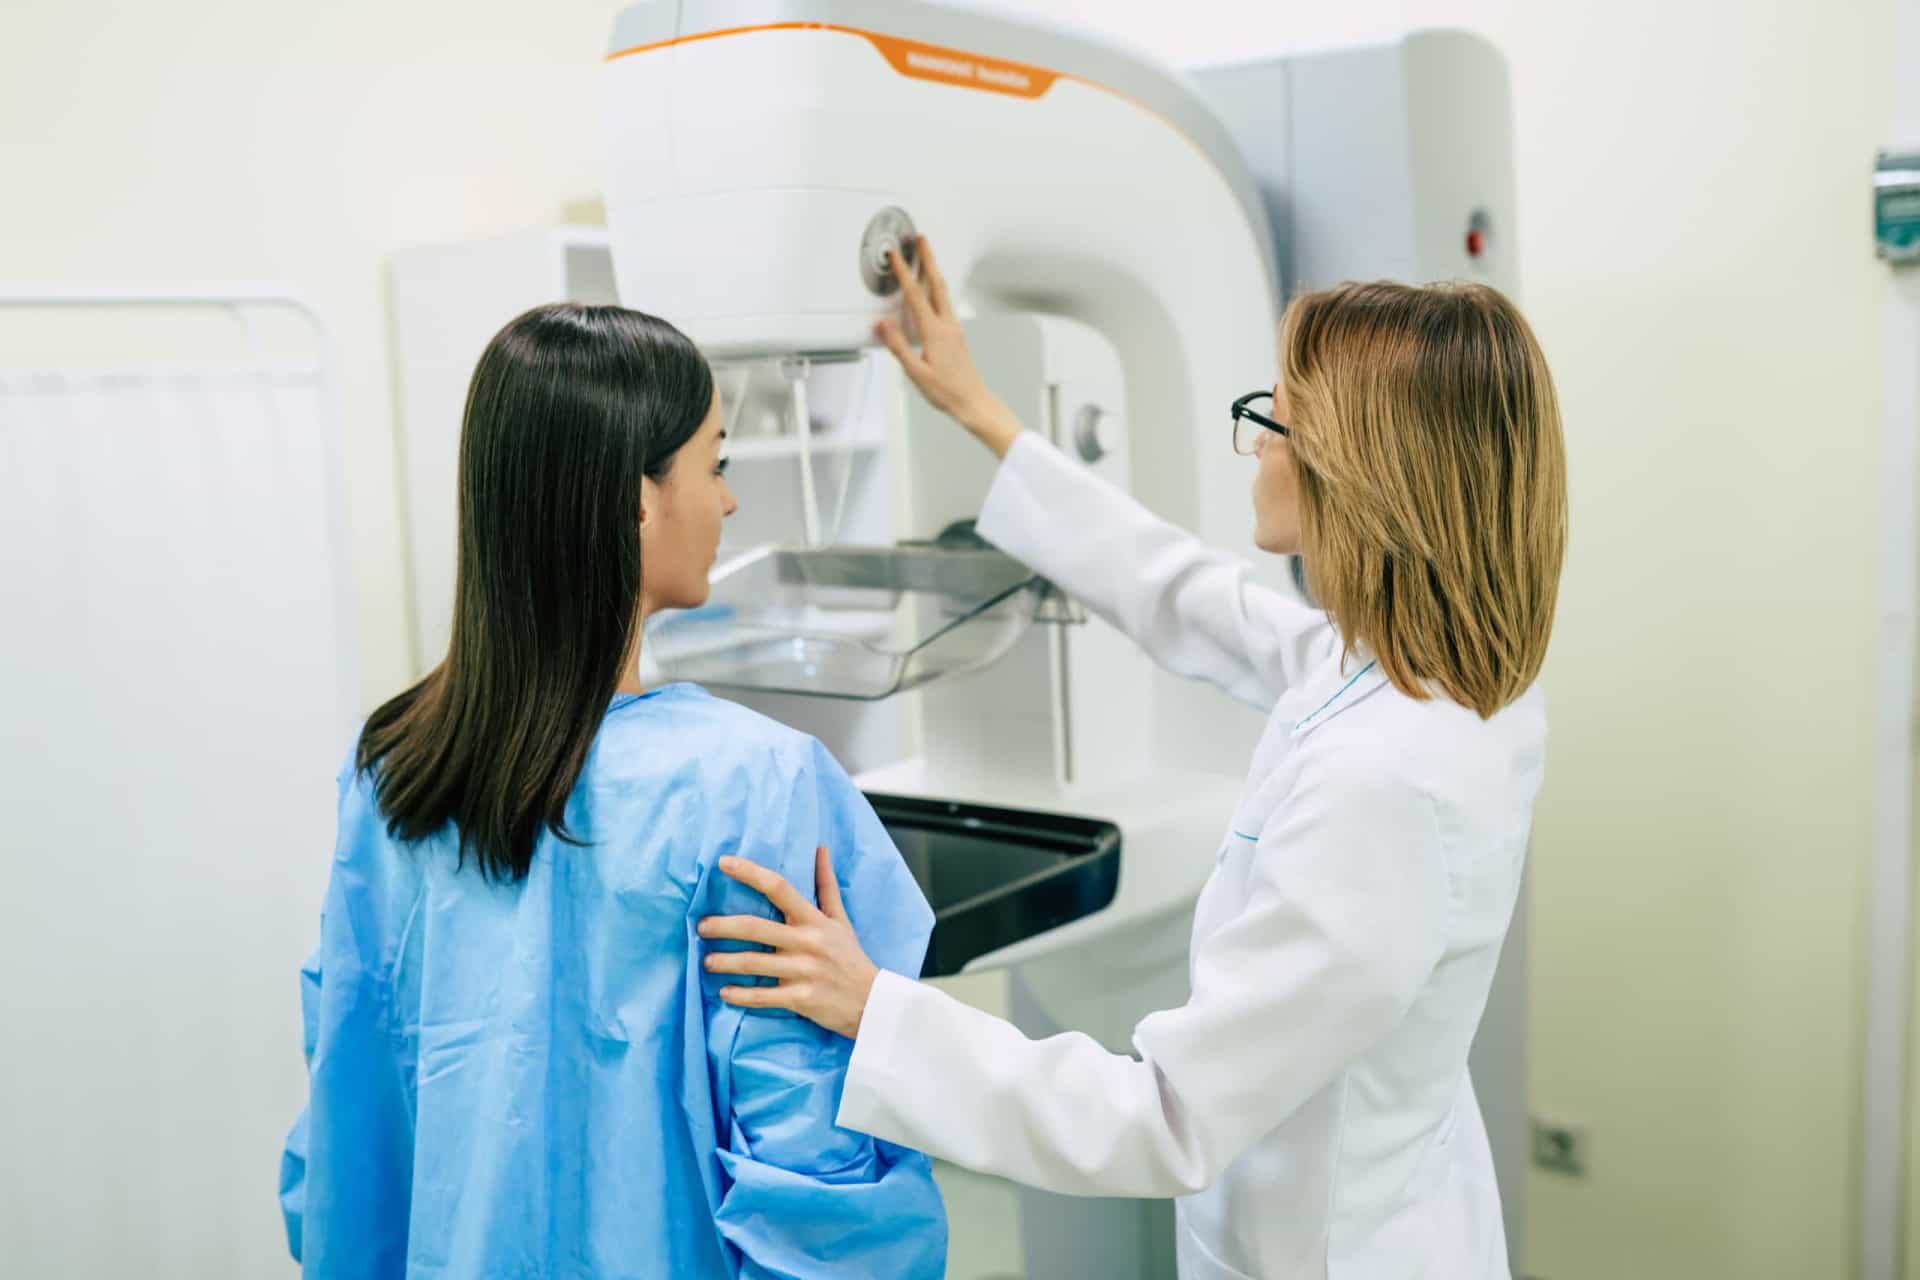 <p>Screening mammography is an x-ray of the breasts. It is used to detect signs of breast cancer.</p><p>You may also like:<a href="https://www.starsinsider.com/n/238579?utm_source=msn.com&utm_medium=display&utm_campaign=referral_description&utm_content=516289en-us"> The most beautiful actresses ever</a></p>